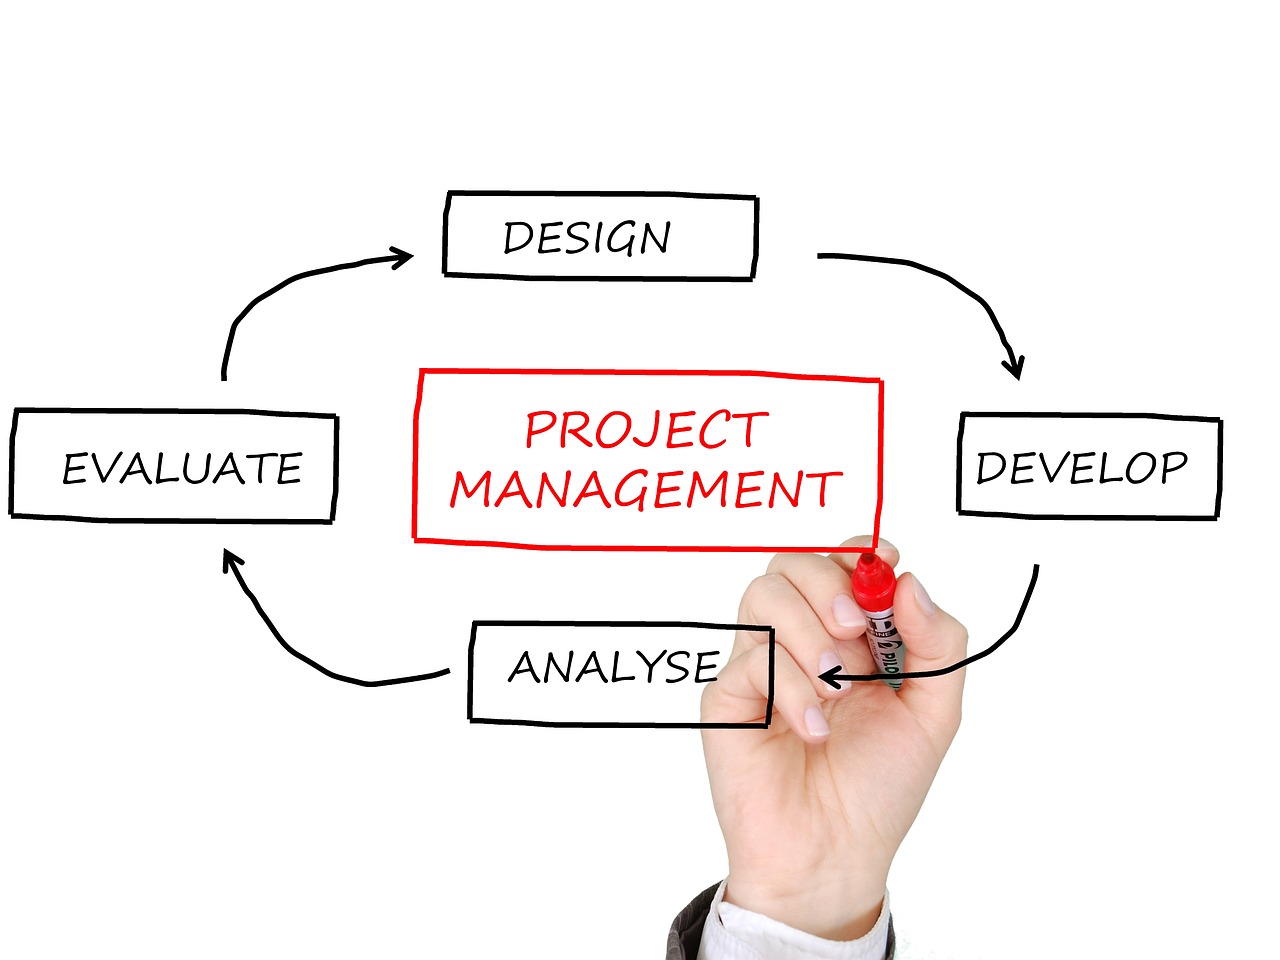 Why is Project Management Important?